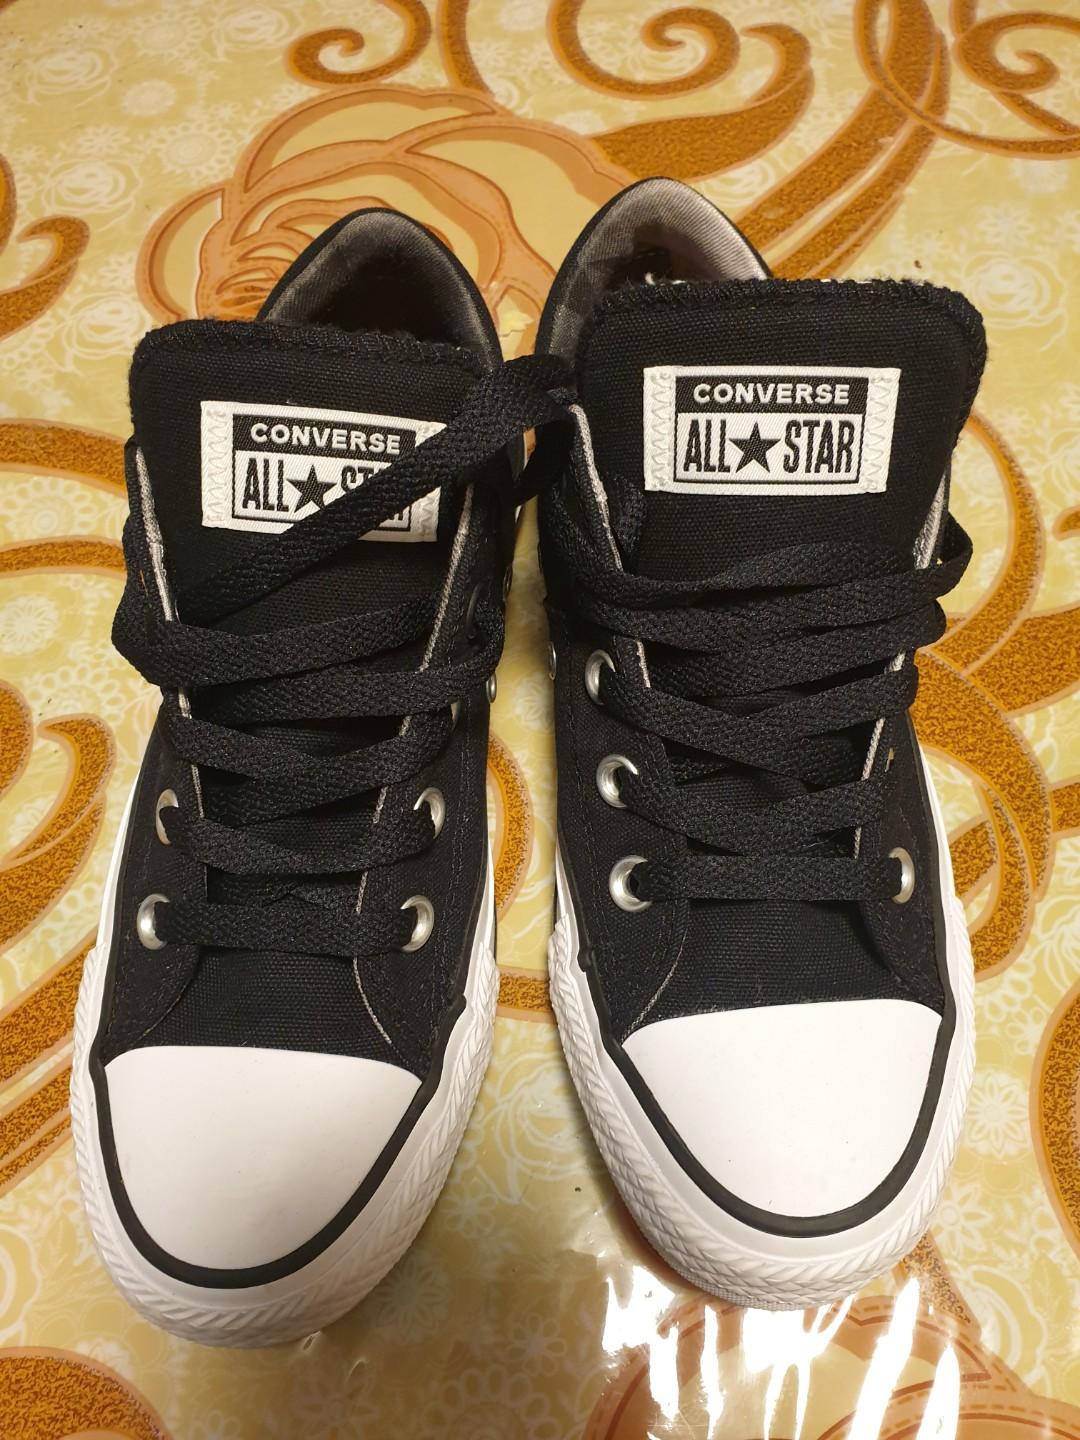 cheapest place to buy converse shoes